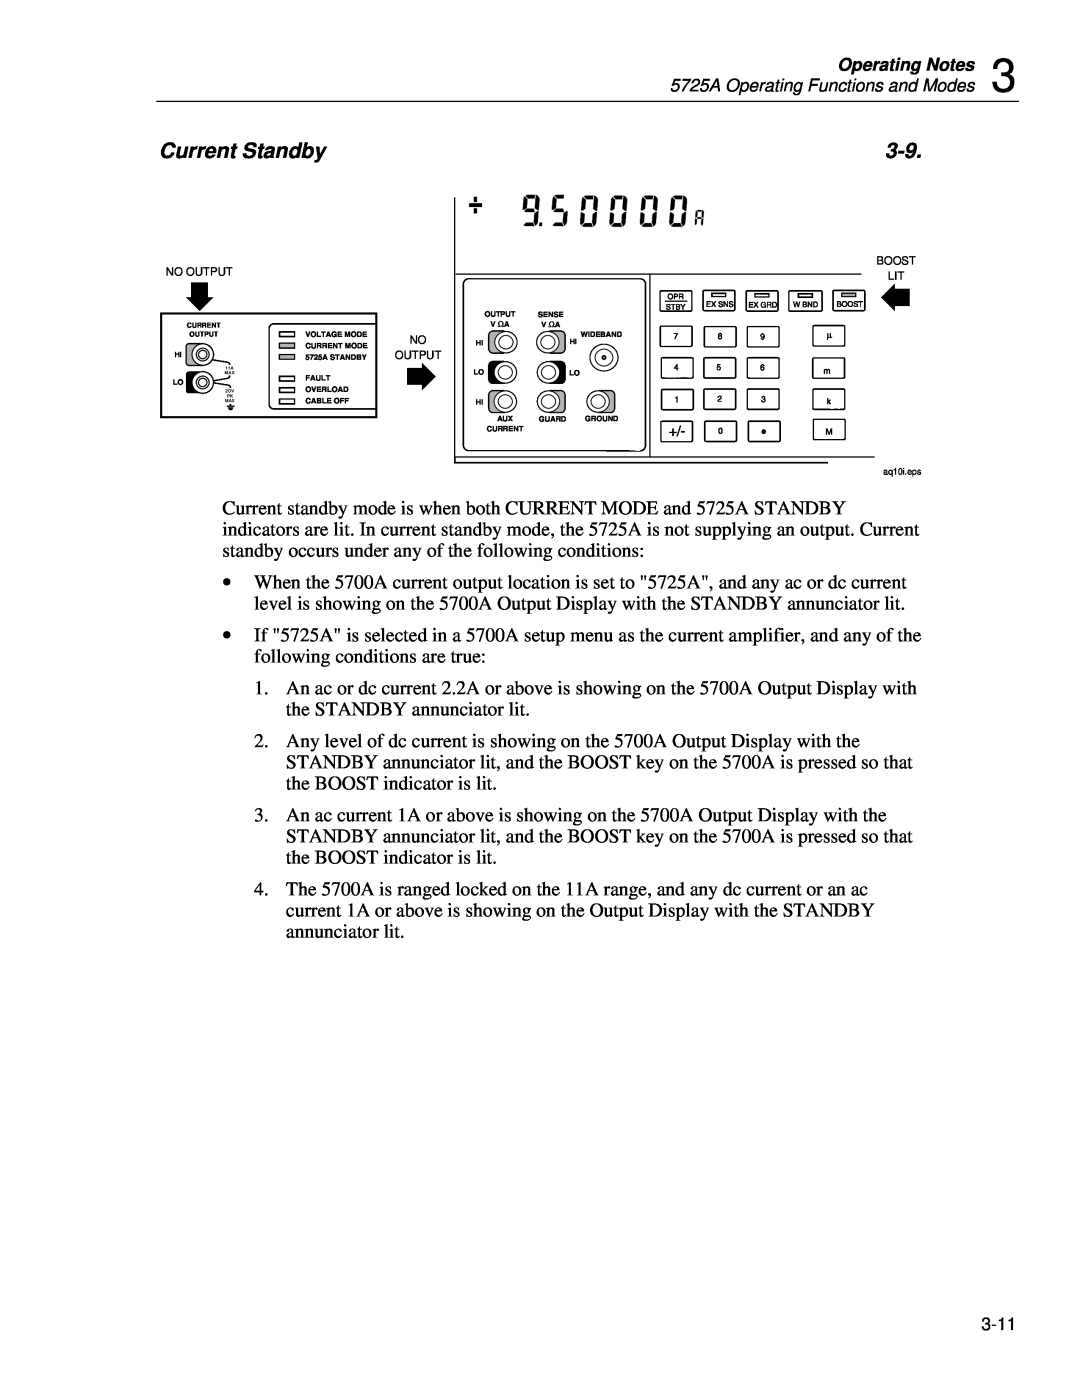 Fluke instruction manual Current Standby, 5725A Operating Functions and Modes 